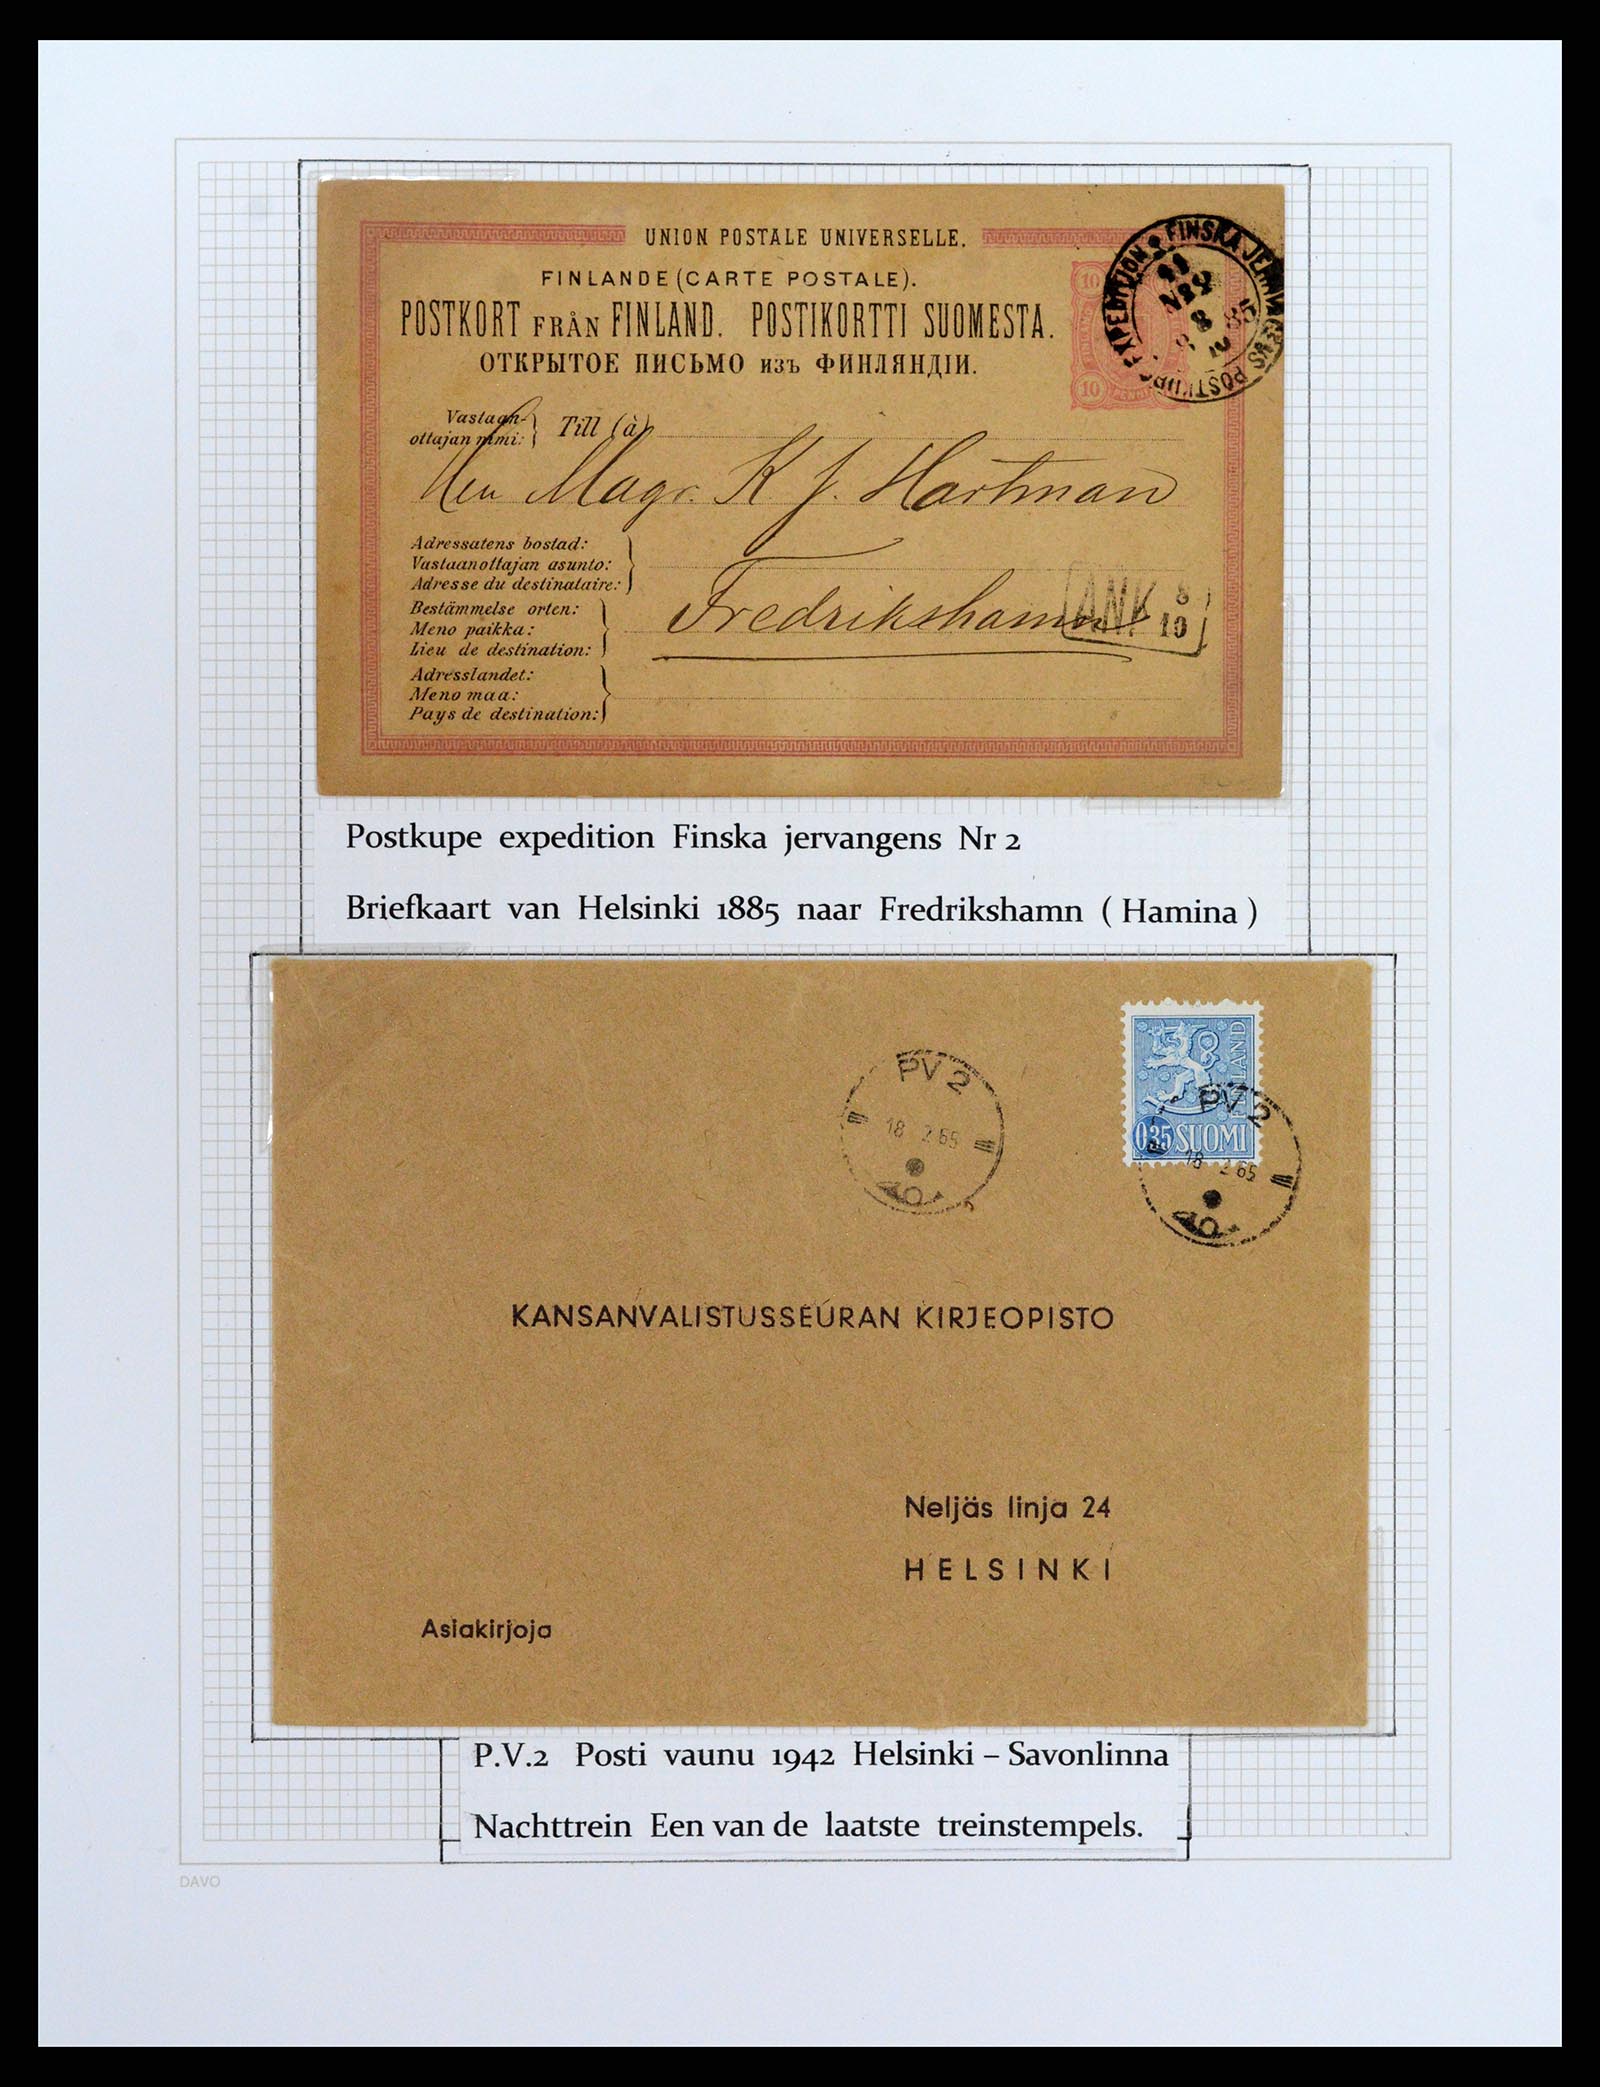 37766 018 - Stamp collection 37766 Finland railway cancellations 1870-1950.